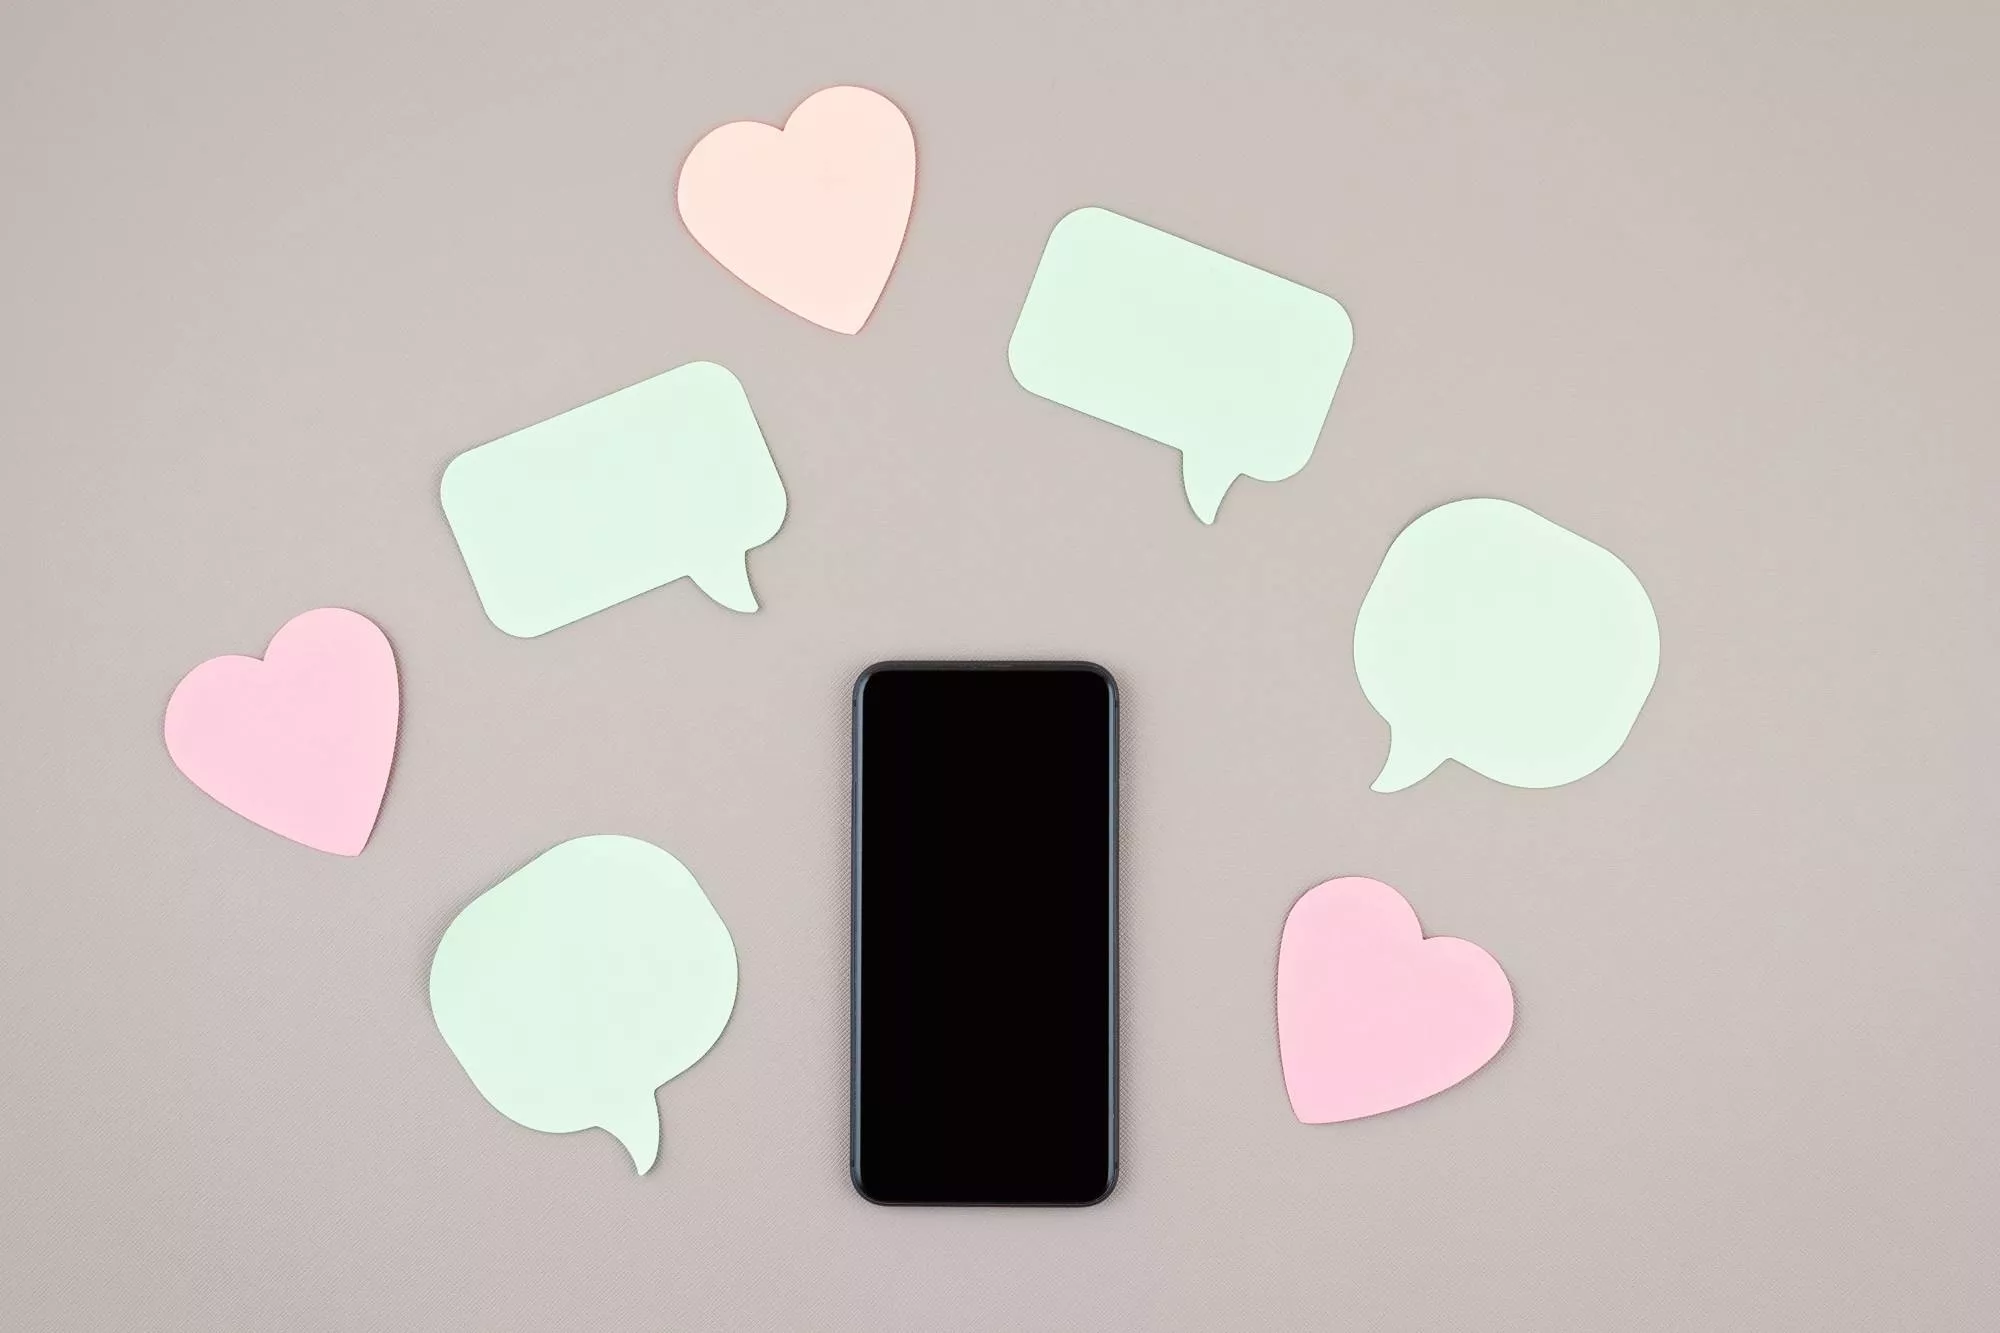 a phone on a gray background that shows social media marketing tools such as the like and comment symbol